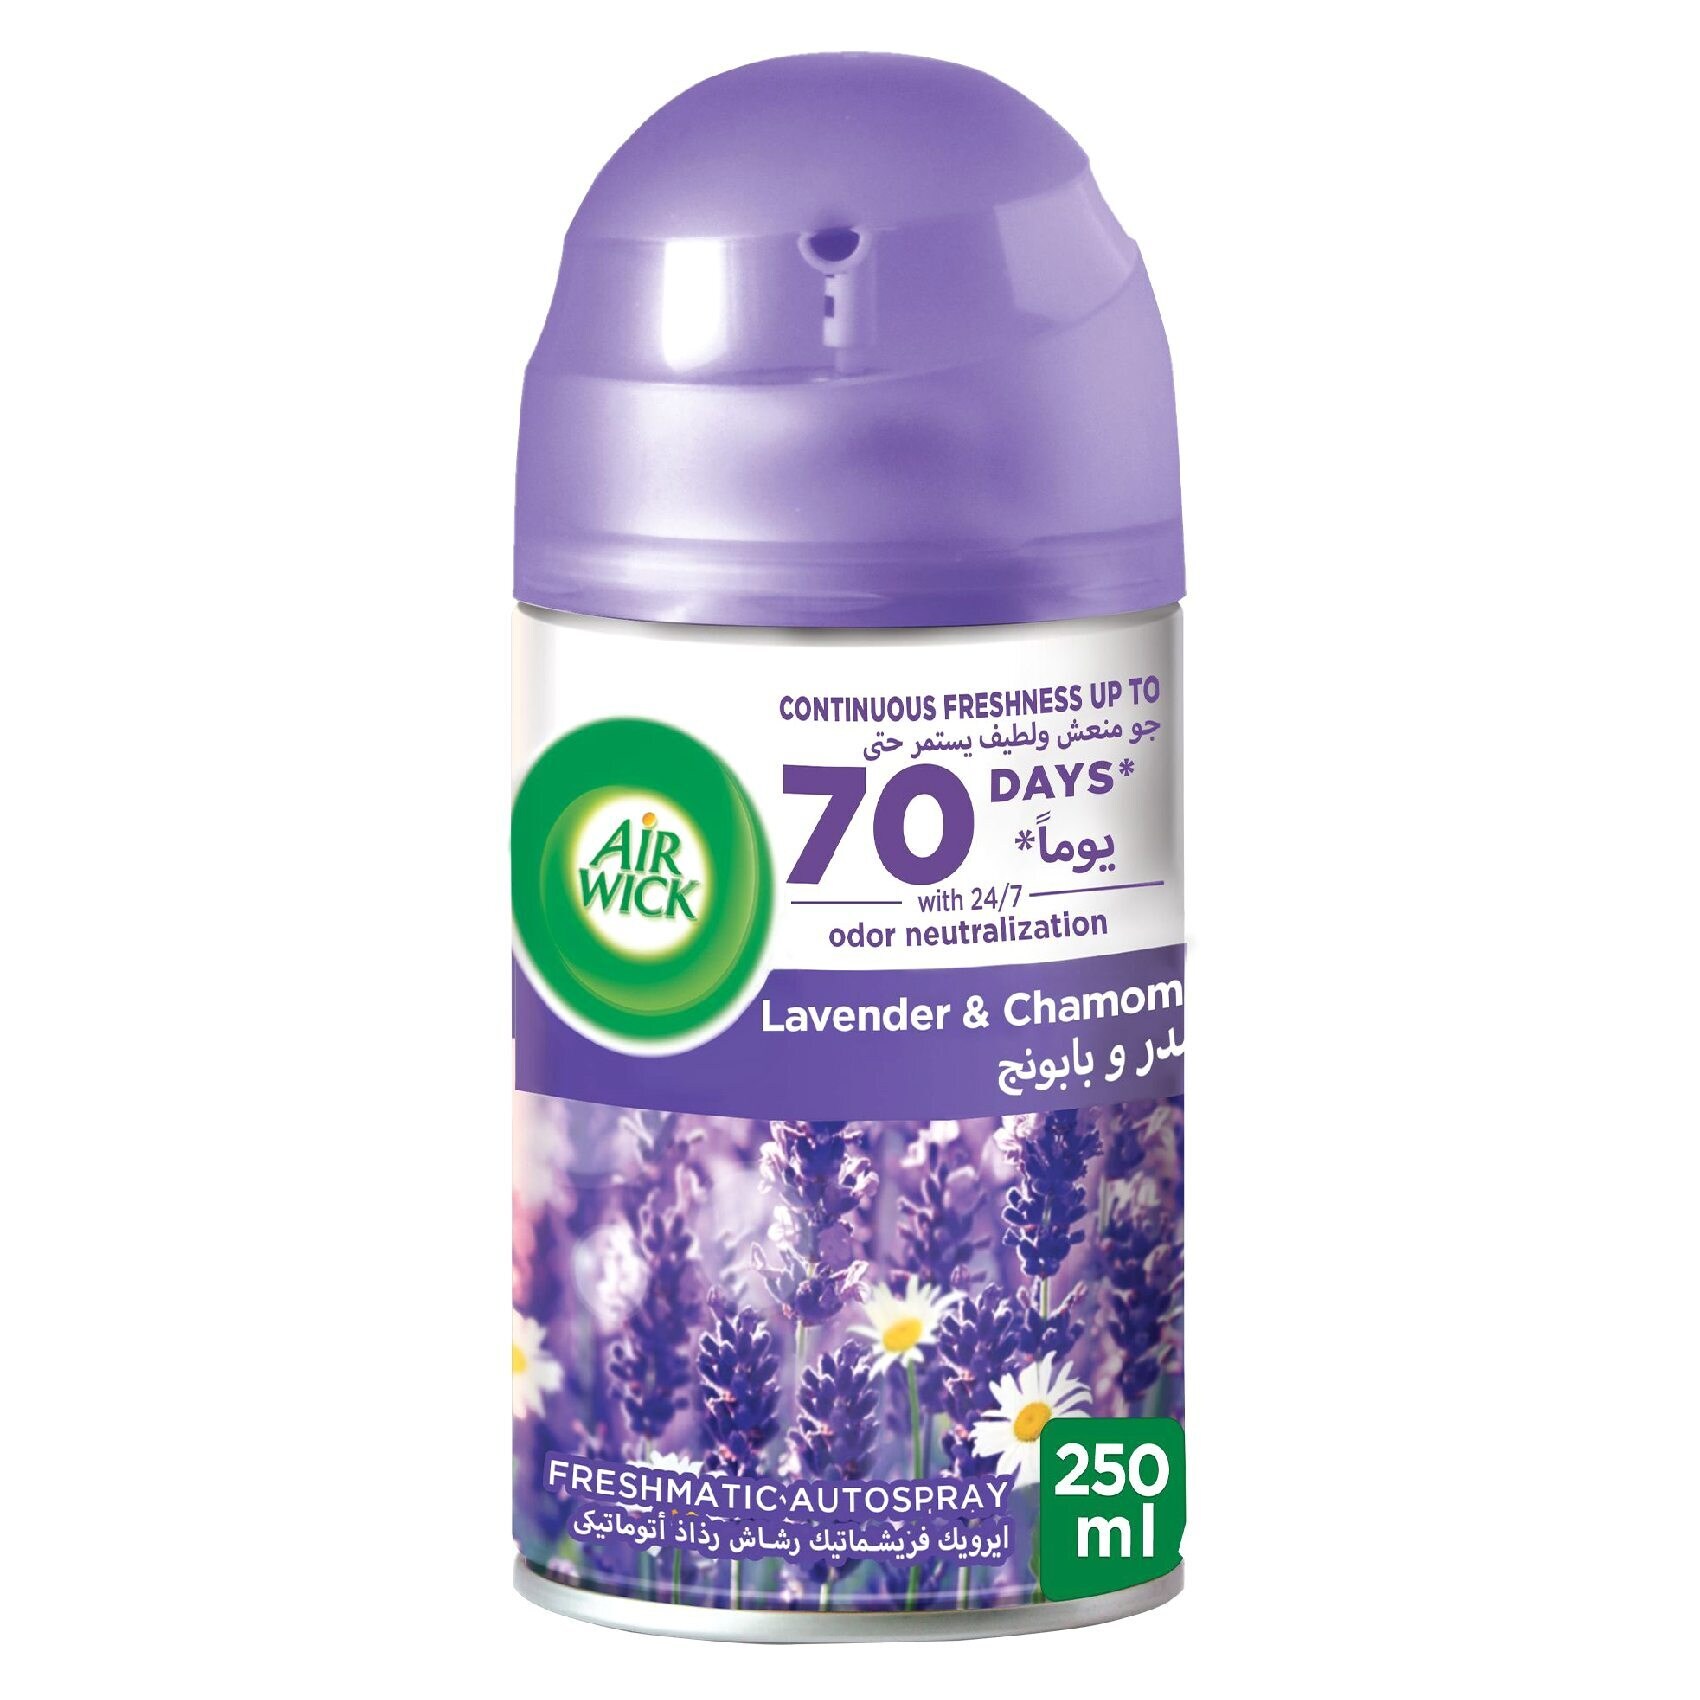 Buy Air Wick Freshmatic Max Lavendar Automatic Spray With Refill Purple  250ml Online - Shop Cleaning & Household on Carrefour UAE